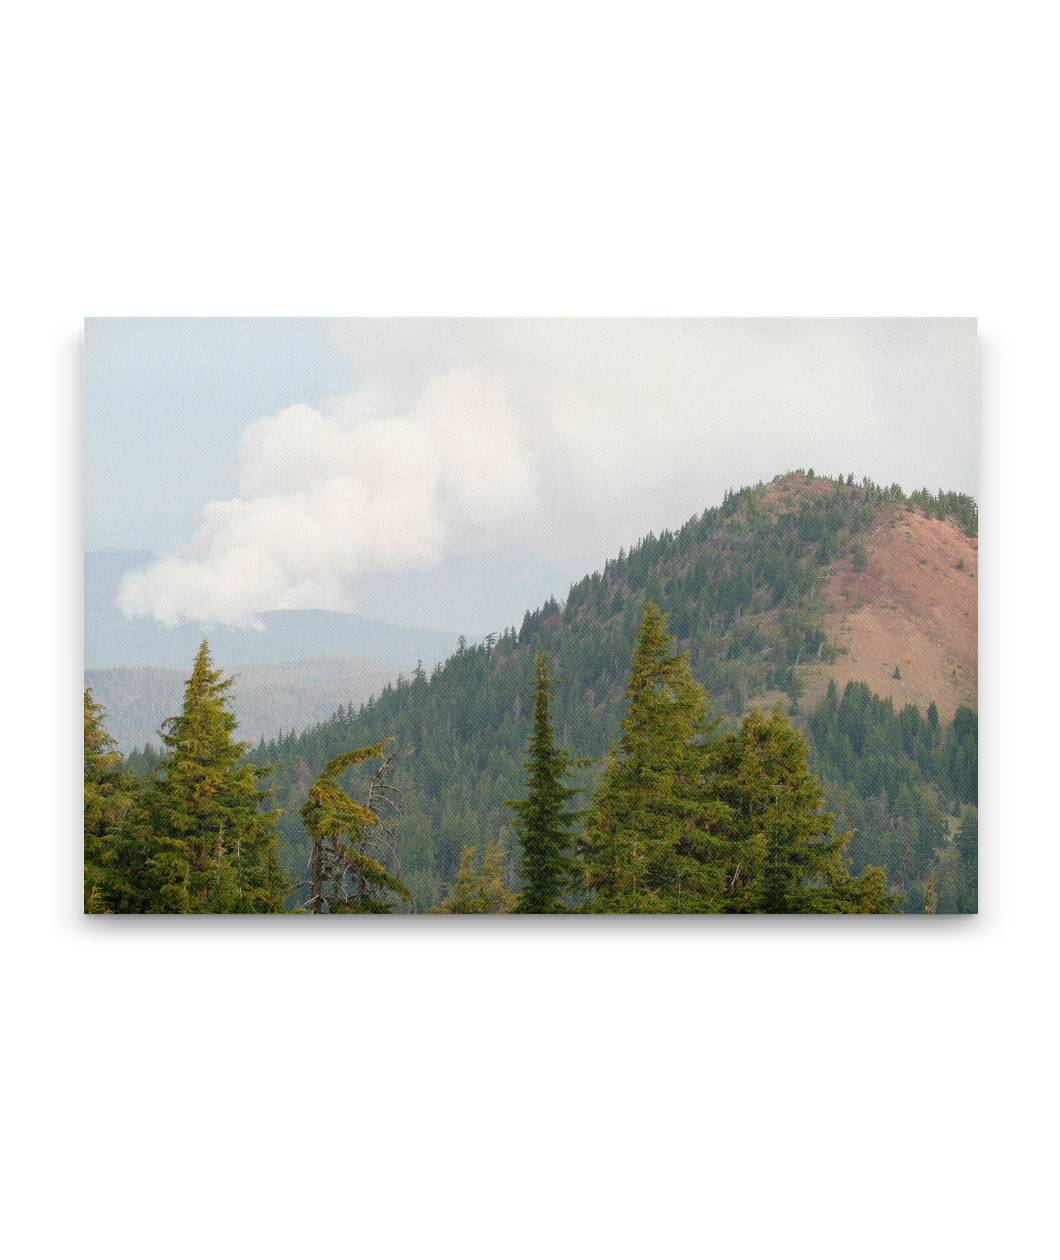 Wildfire Burns Near Grouse Hill, Crater Lake National Park, Oregon